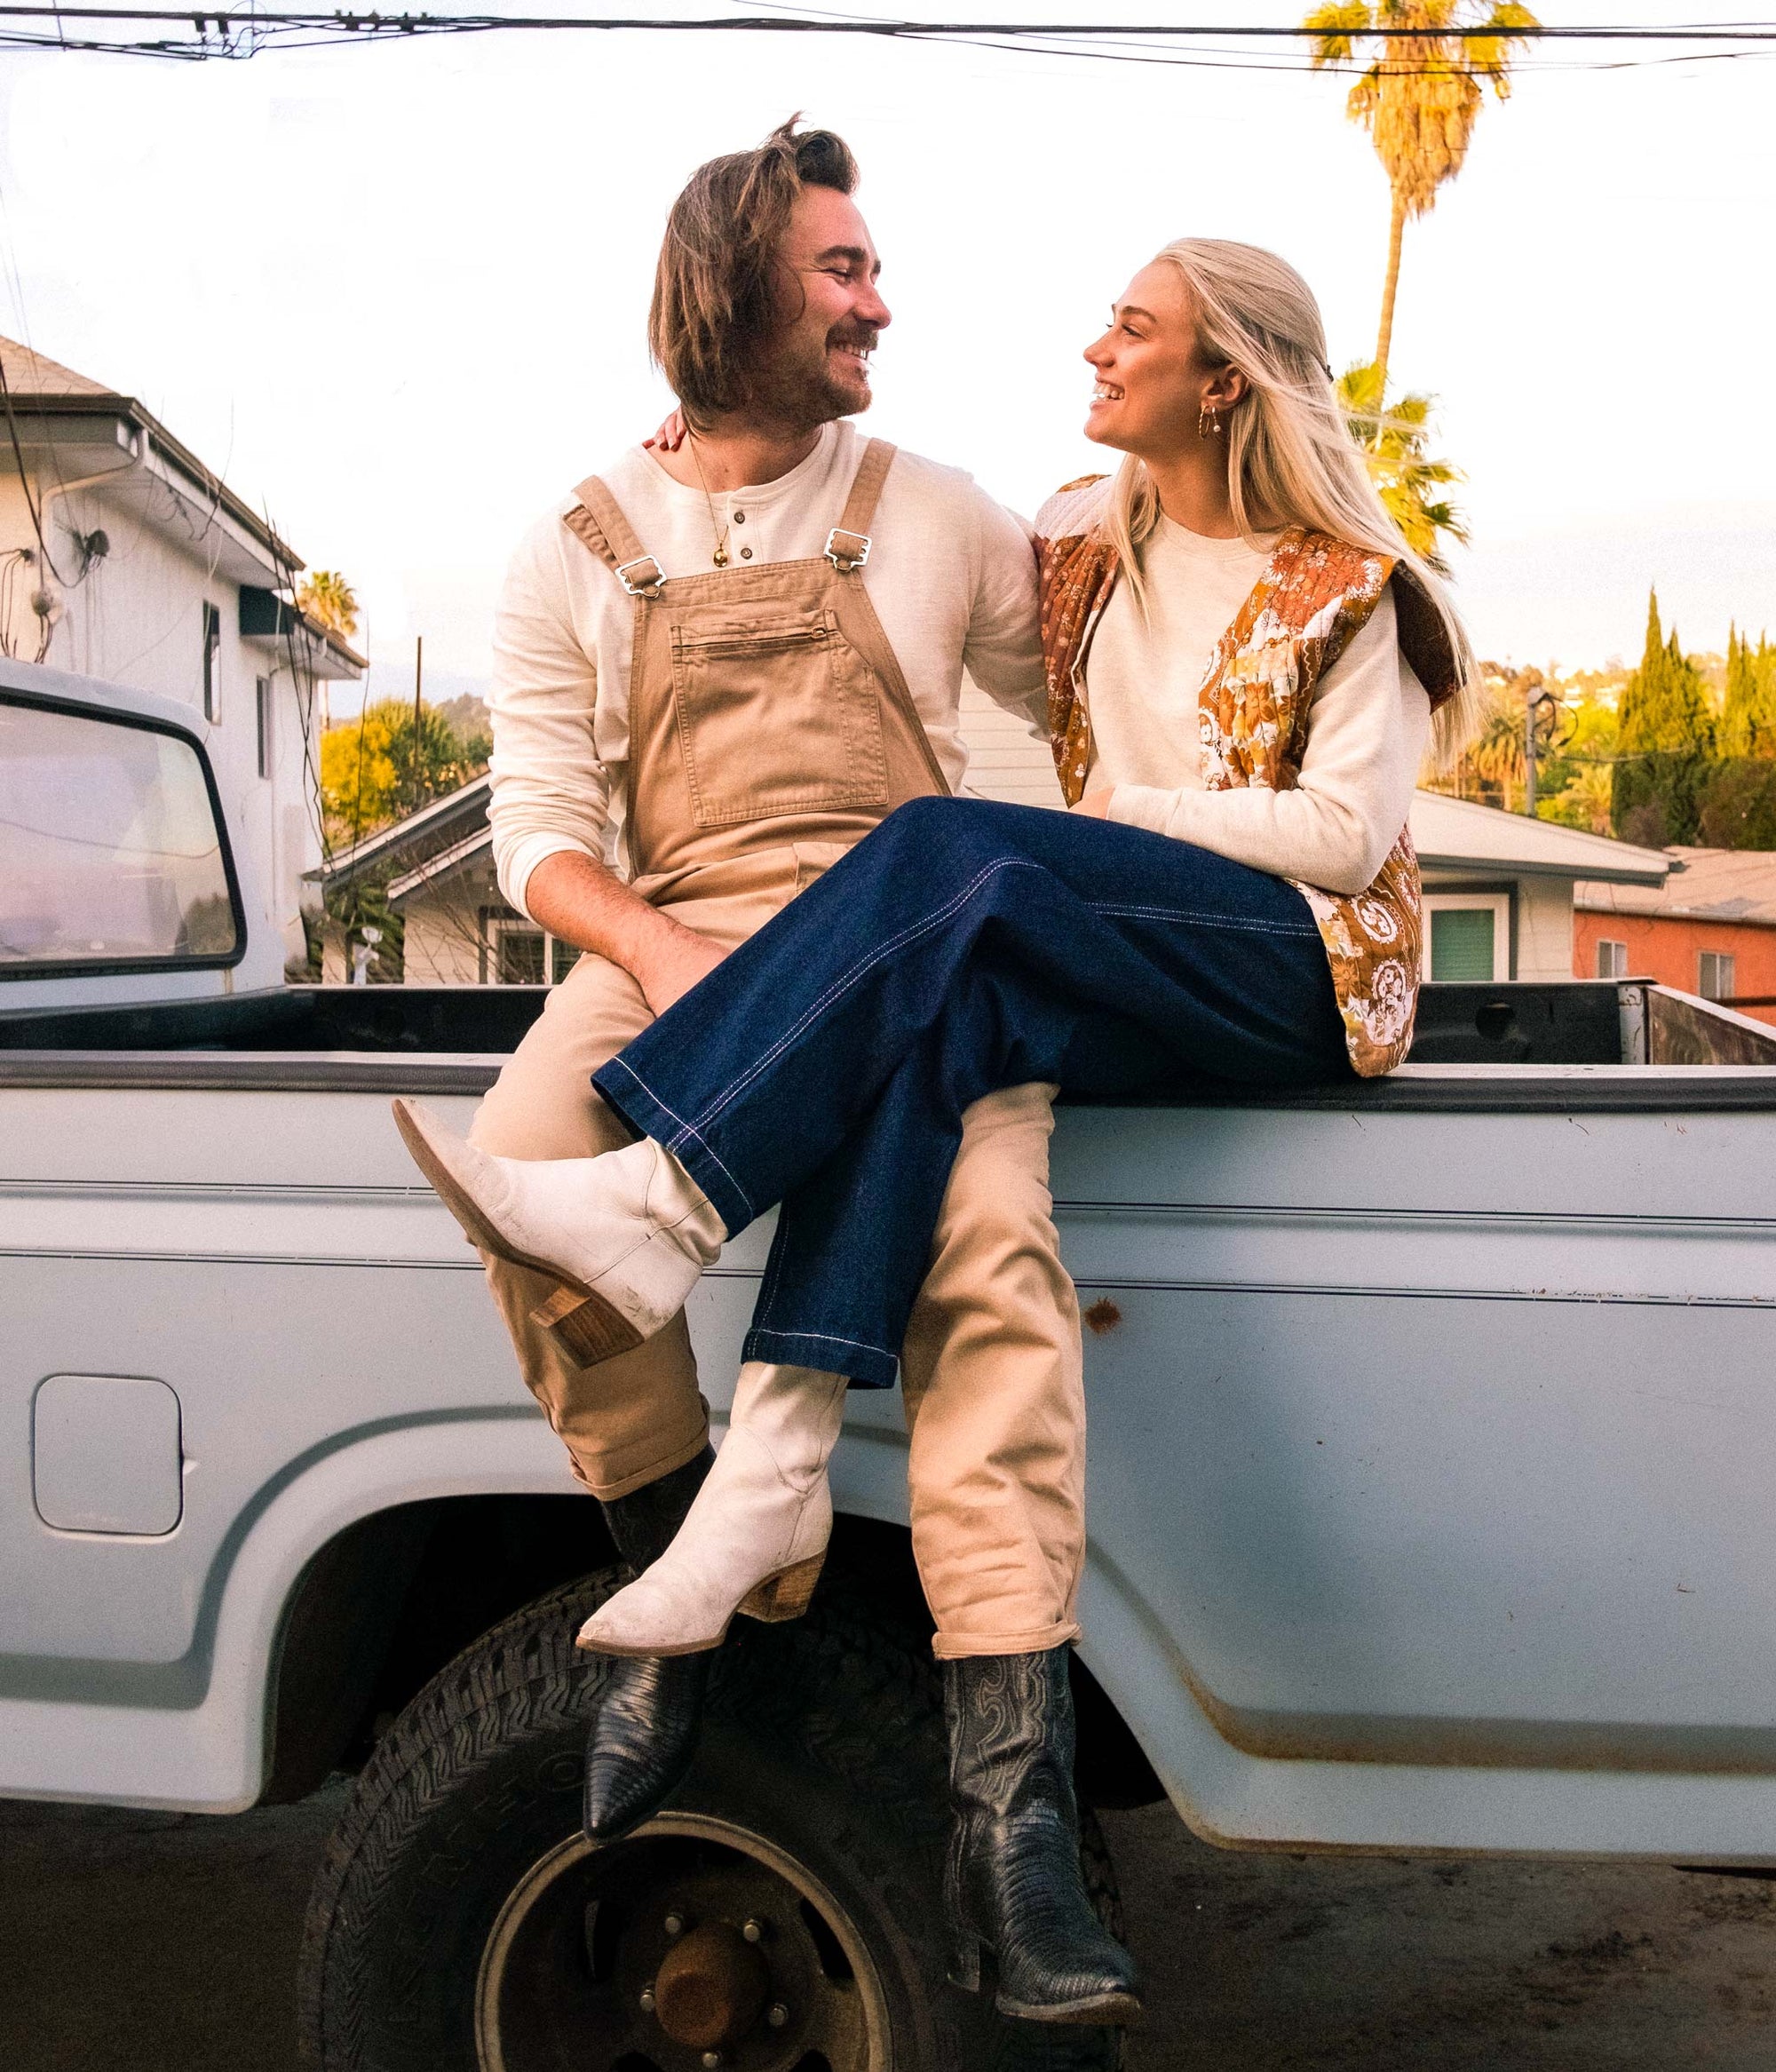 chloé and carter on 1981 F-150 - a whole lotta love the canyon